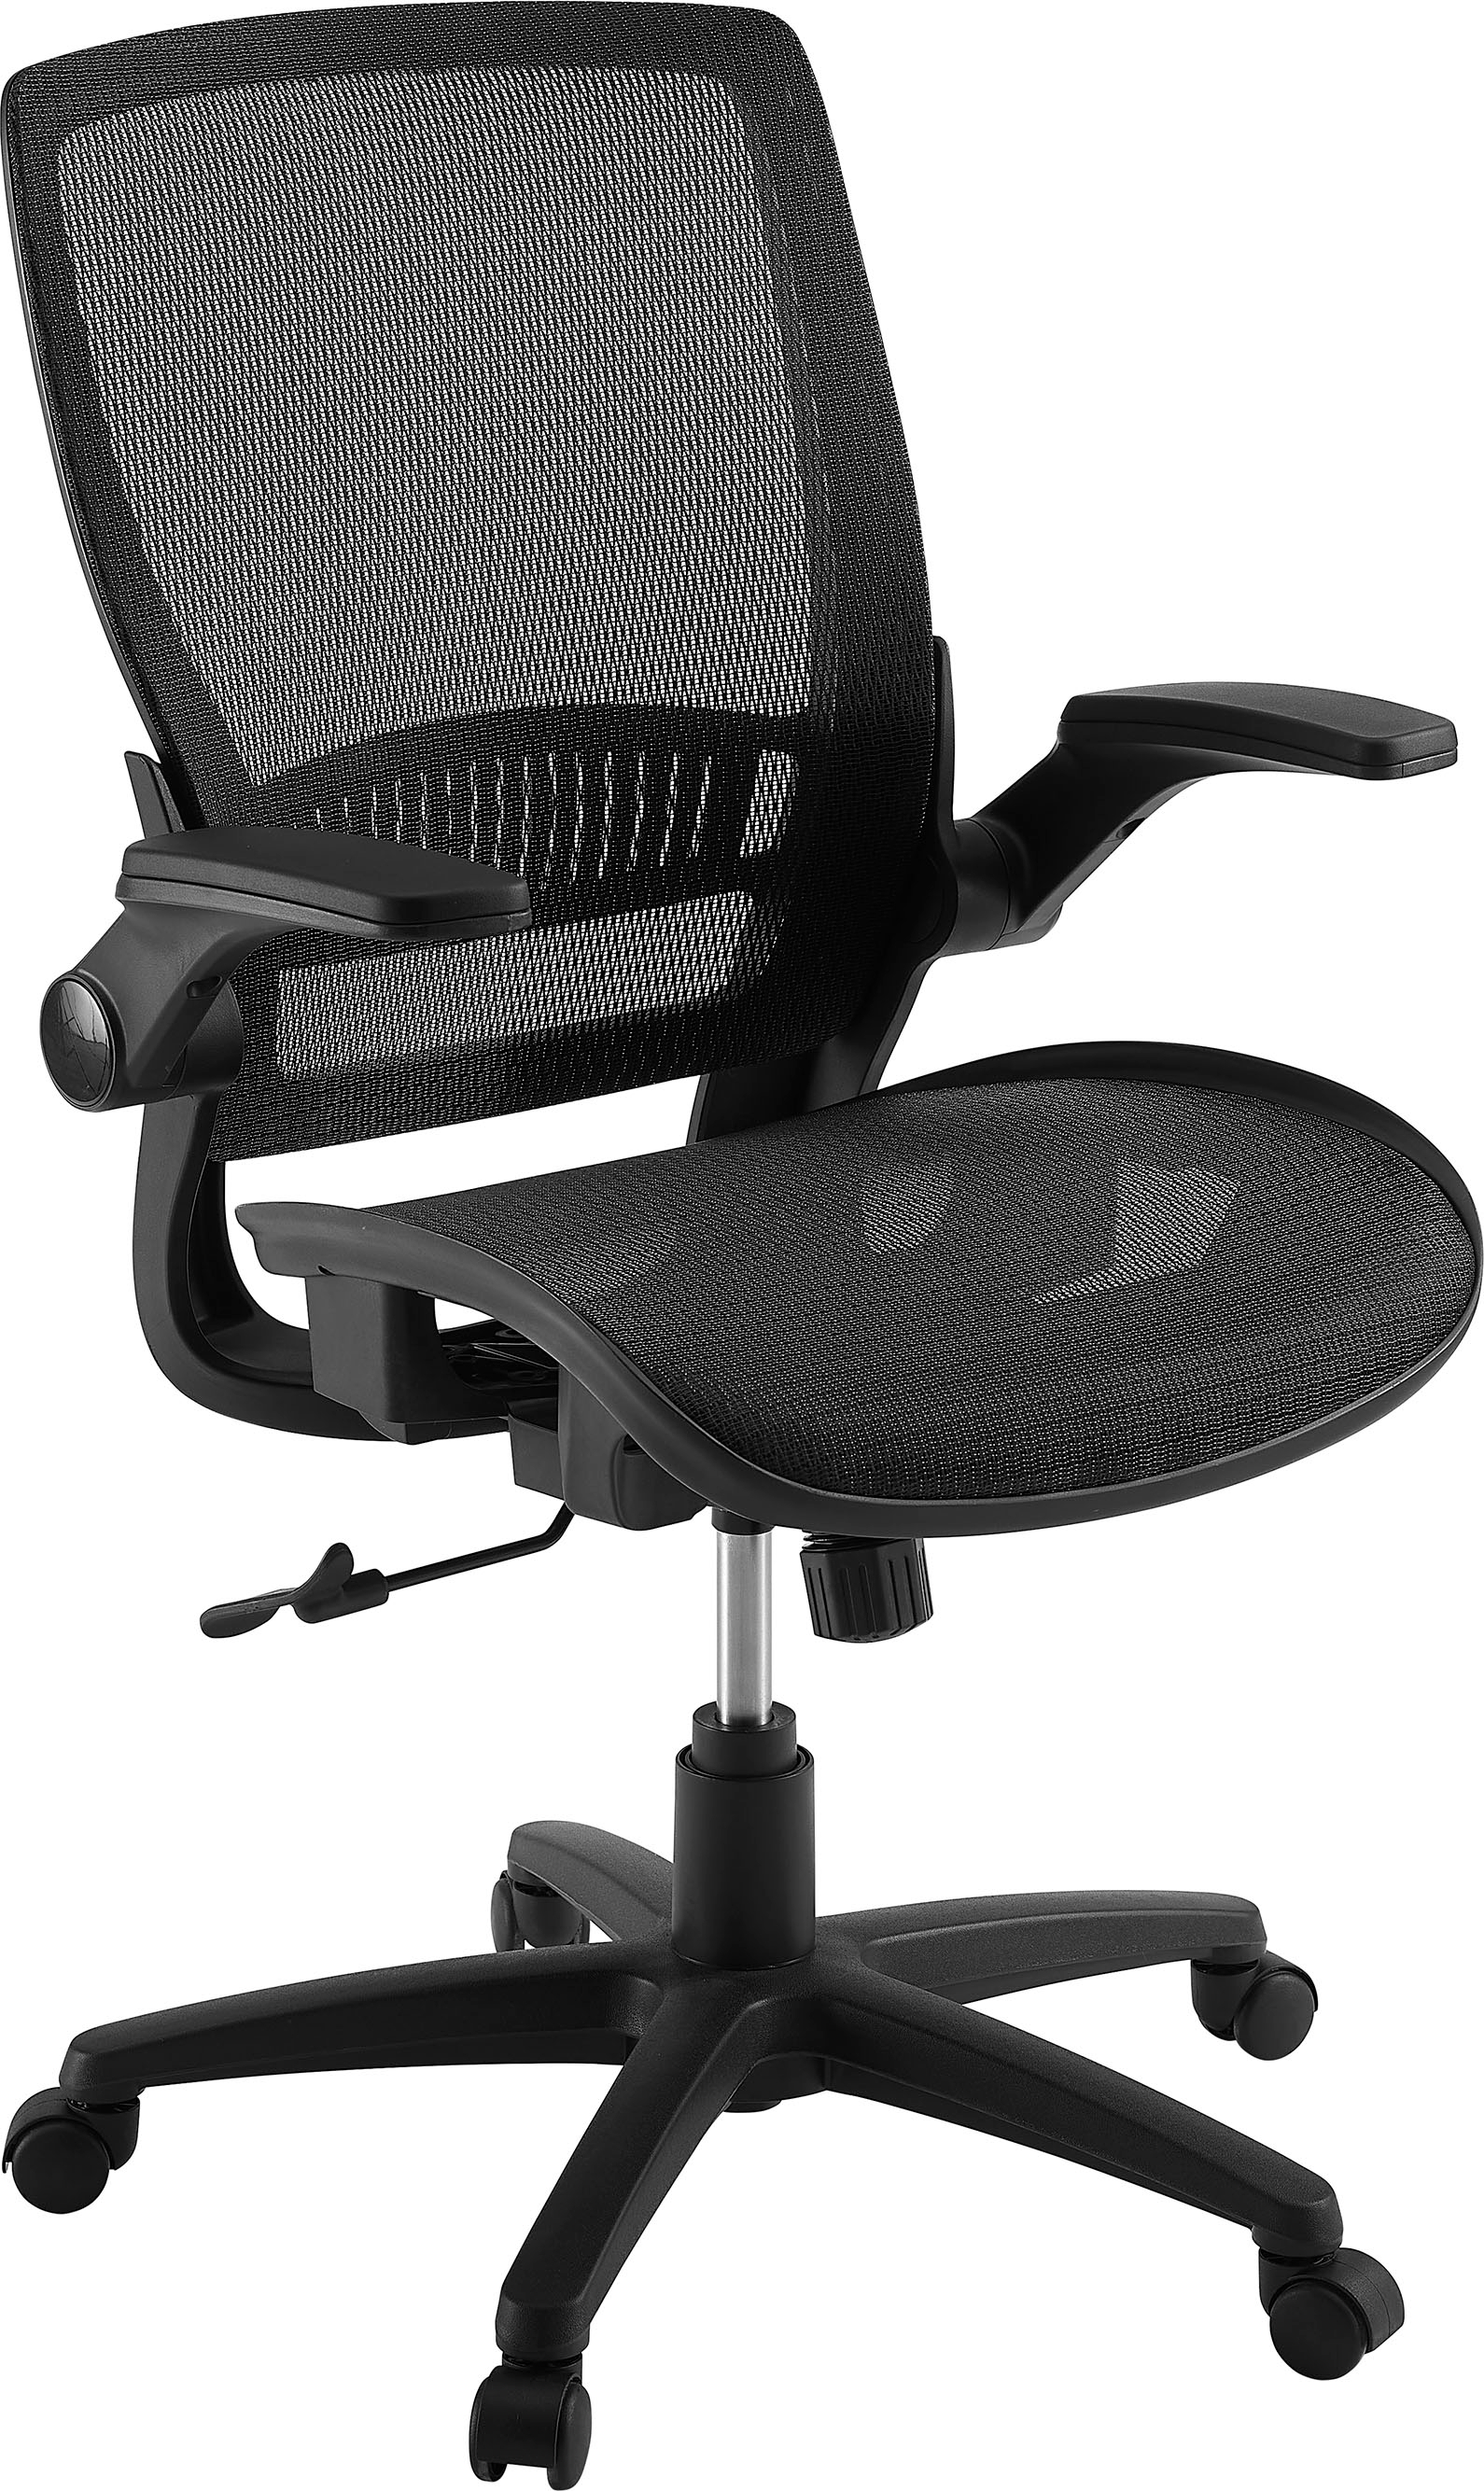 Angle View: Office Star Products - Mesh Chair - Gray